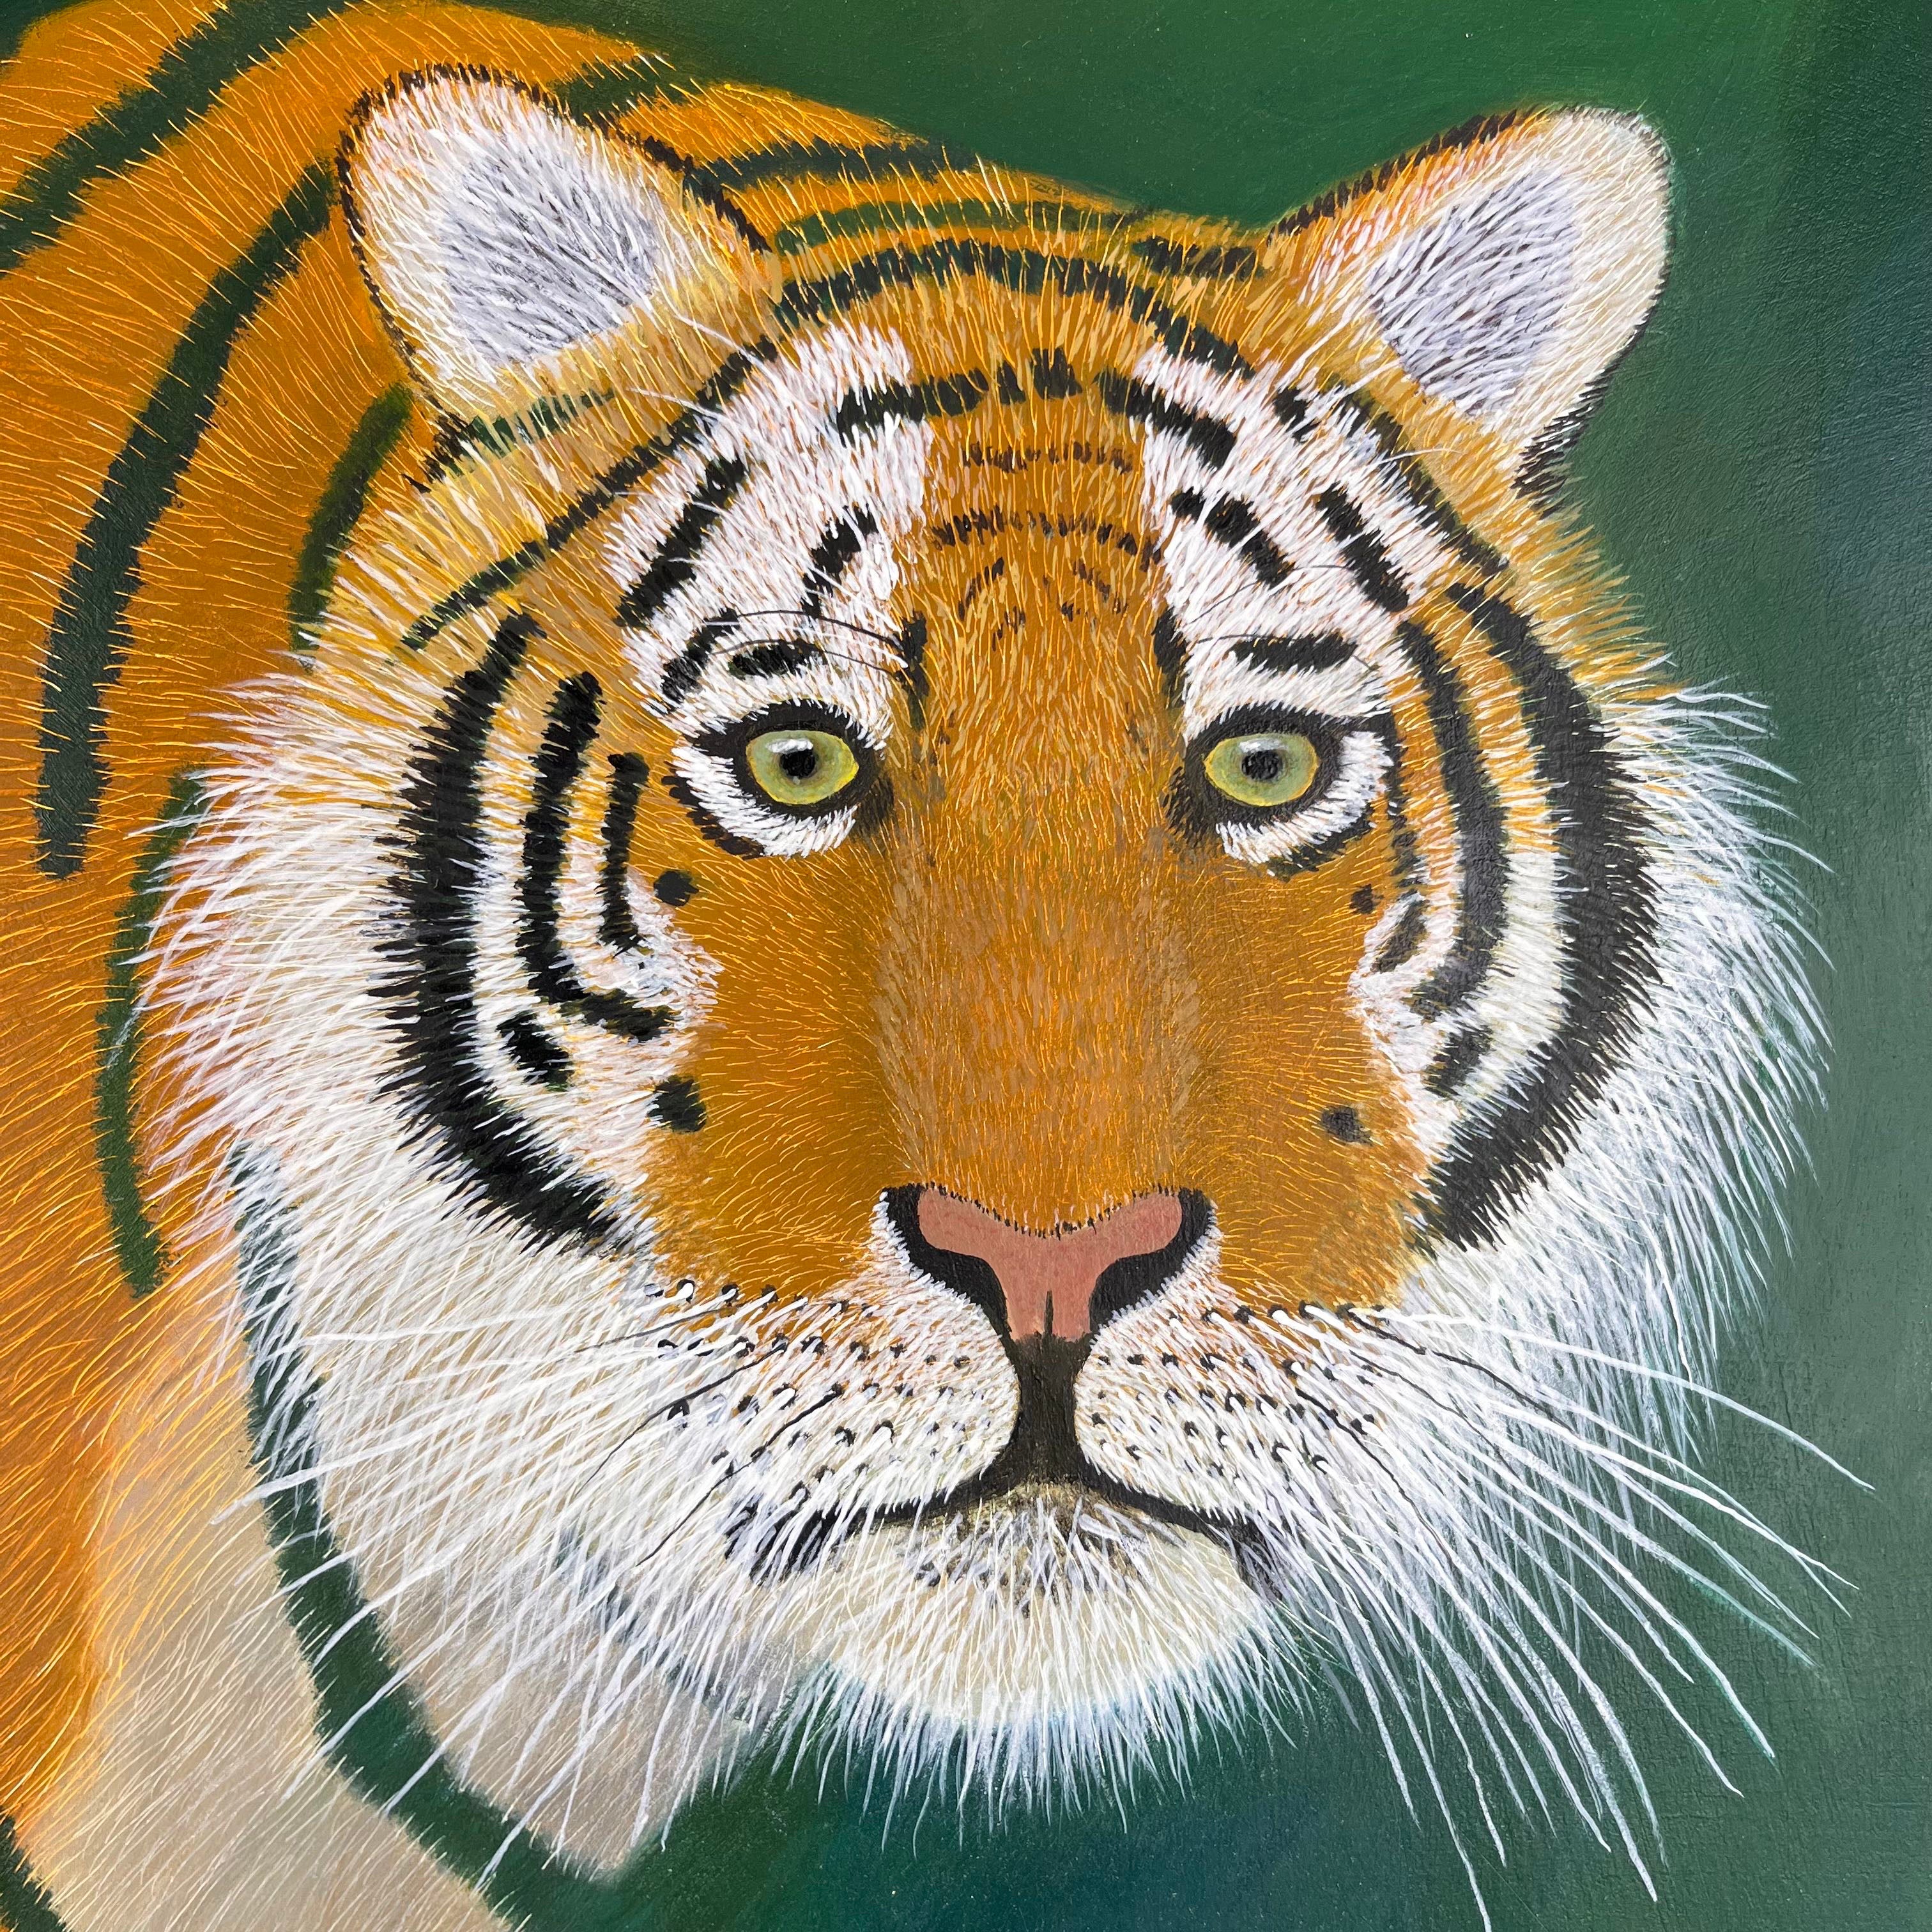 "El Tigre" by Terry Doyle 2015 Oil on Wood Signed Original Painting Wall Art